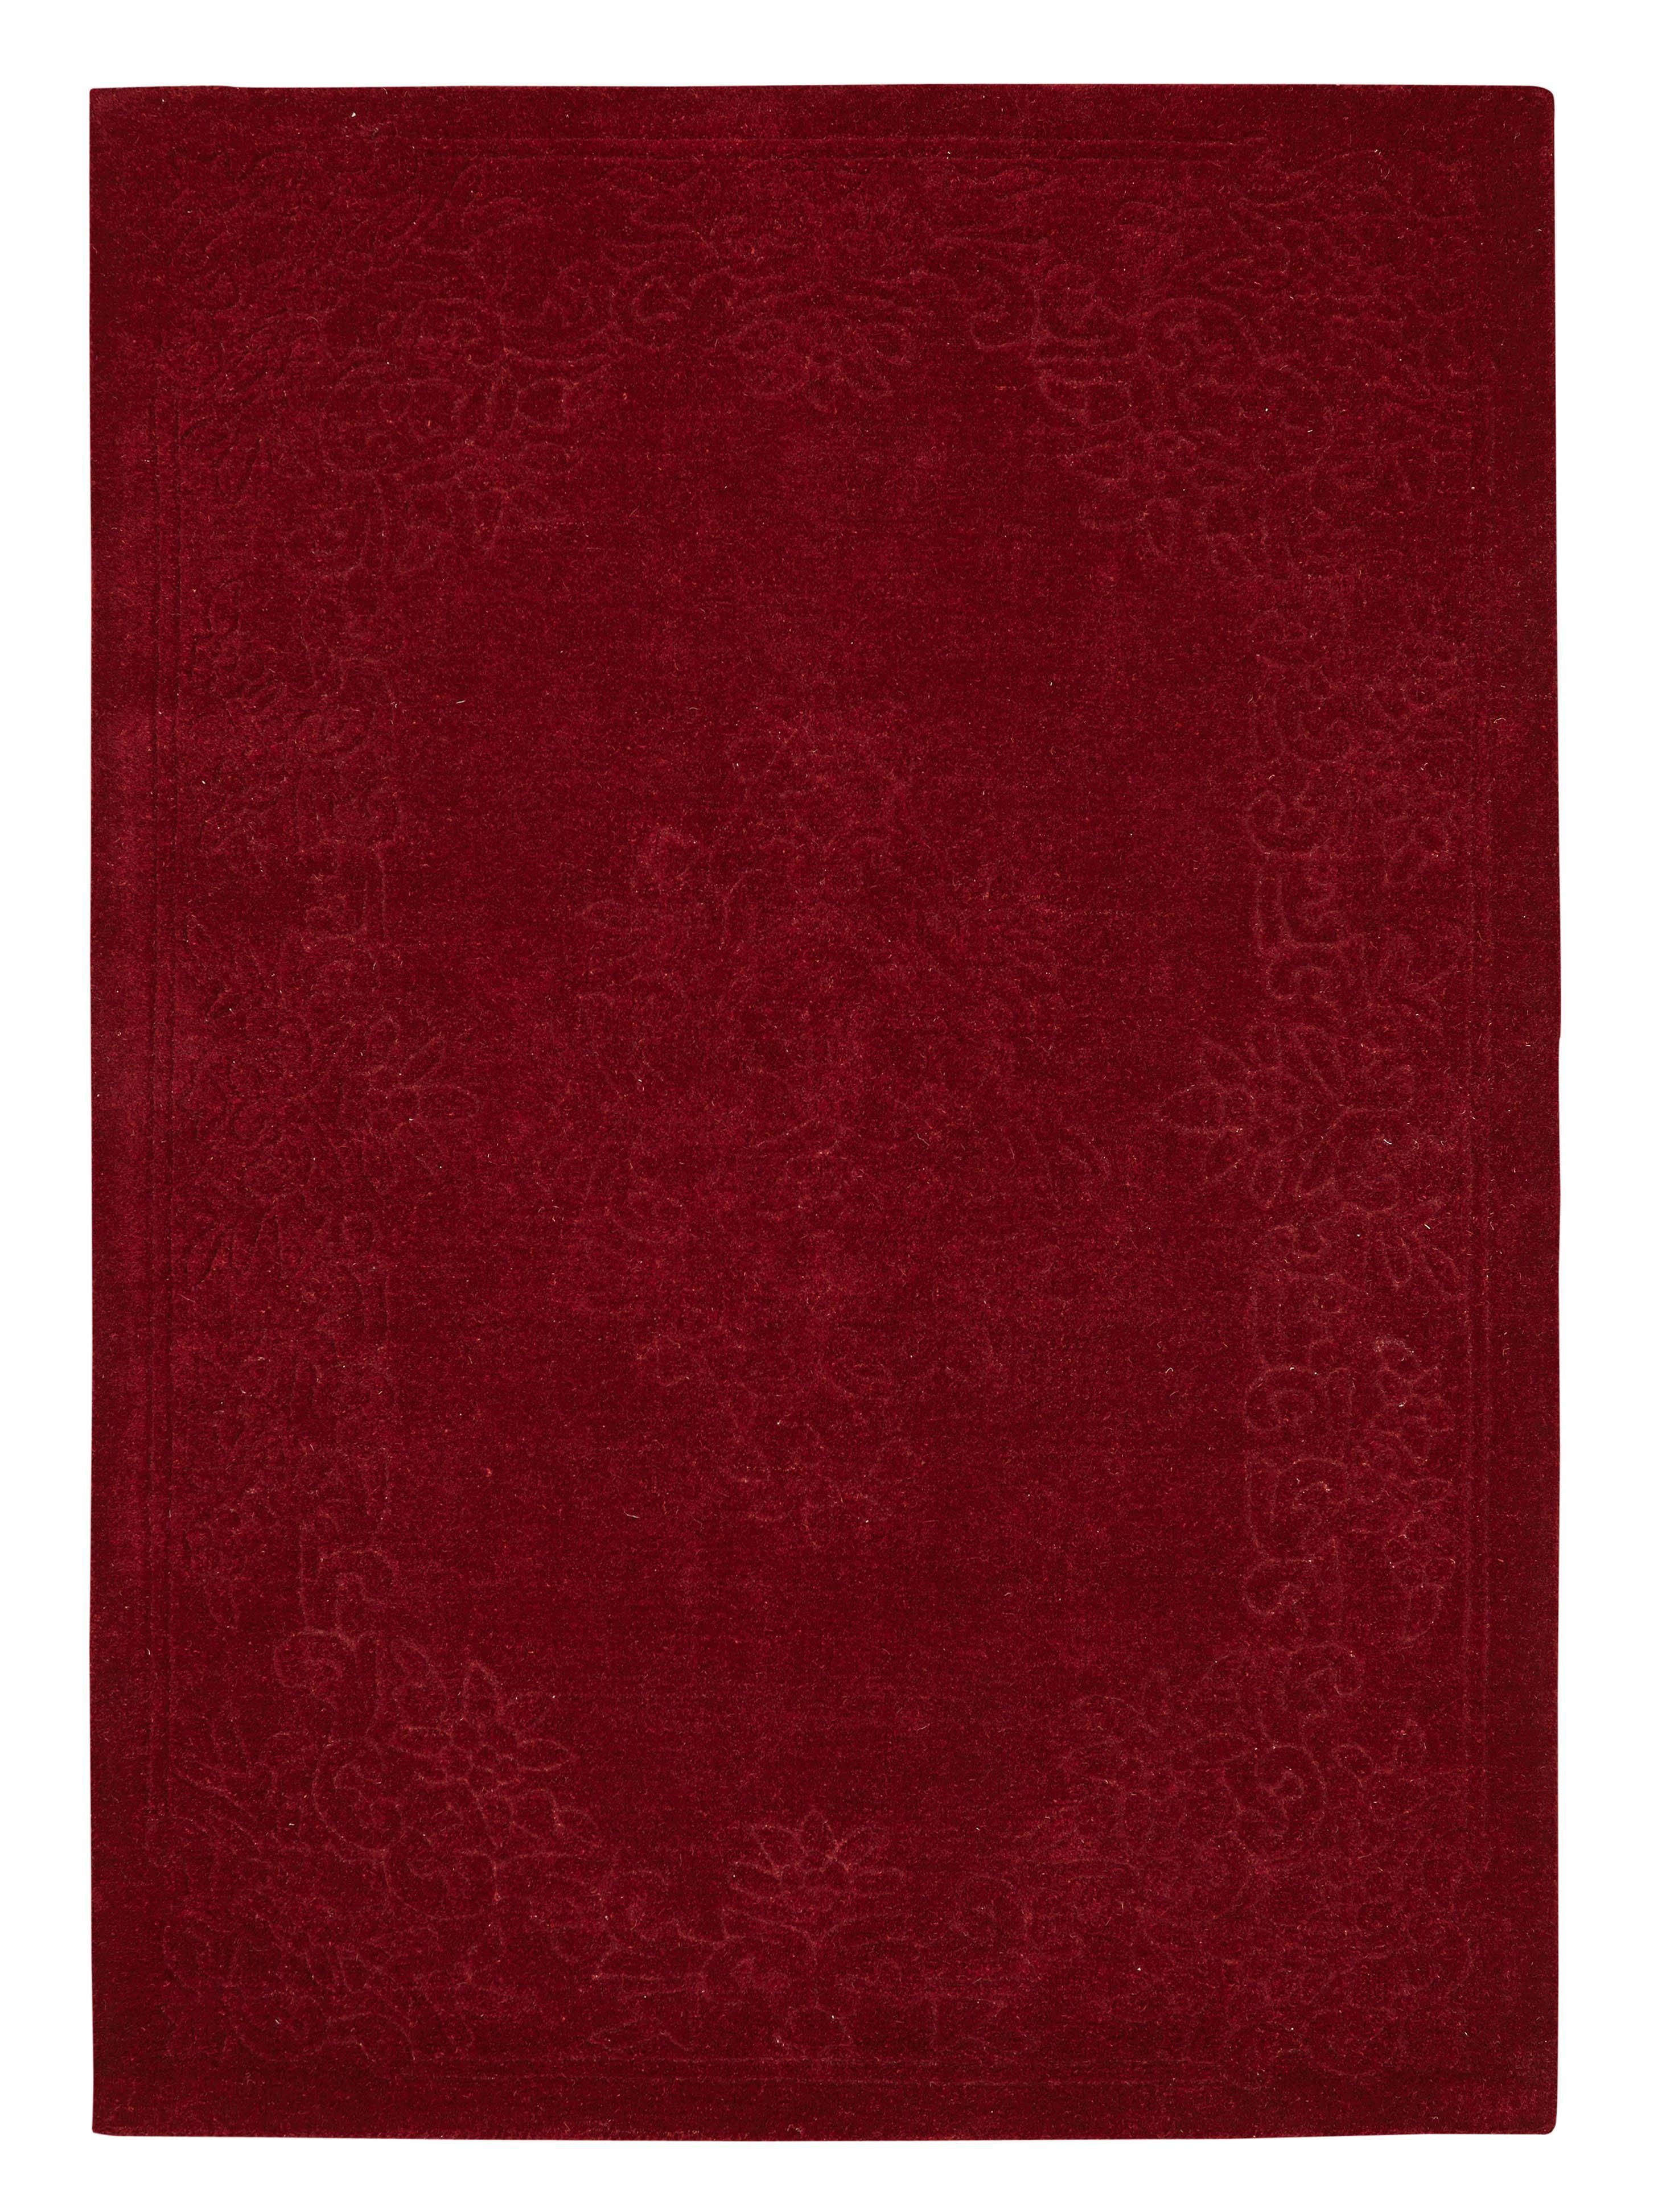 Dark Red Rugs Roselawnlutheran Intended For Red Wool Rugs (View 2 of 15)